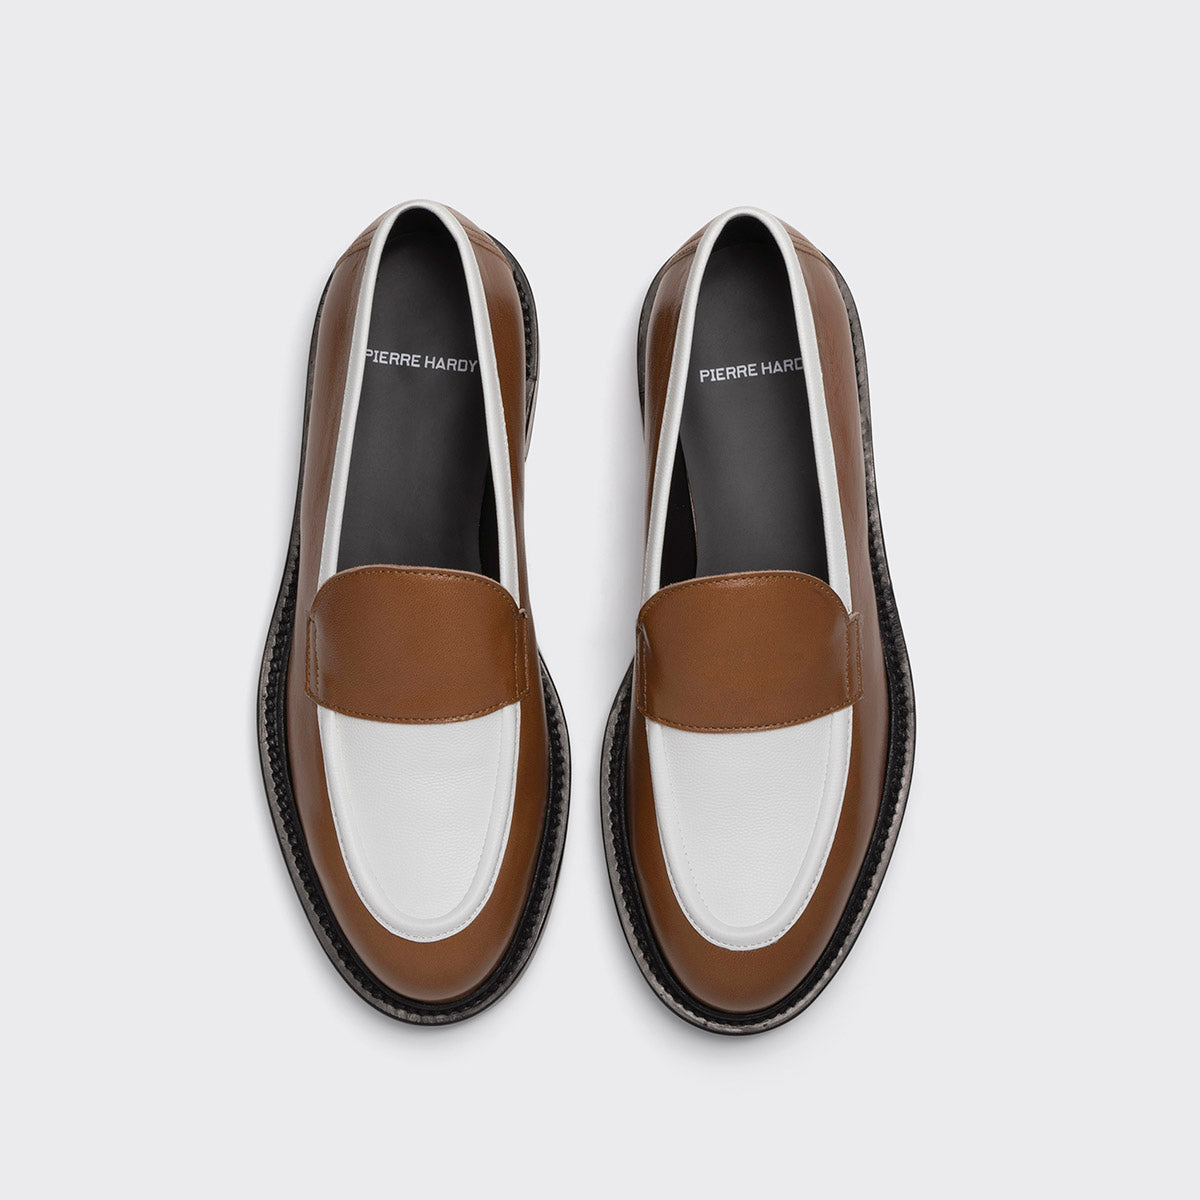 JOHN loafers for women in camel & white leather — PIERRE HARDY